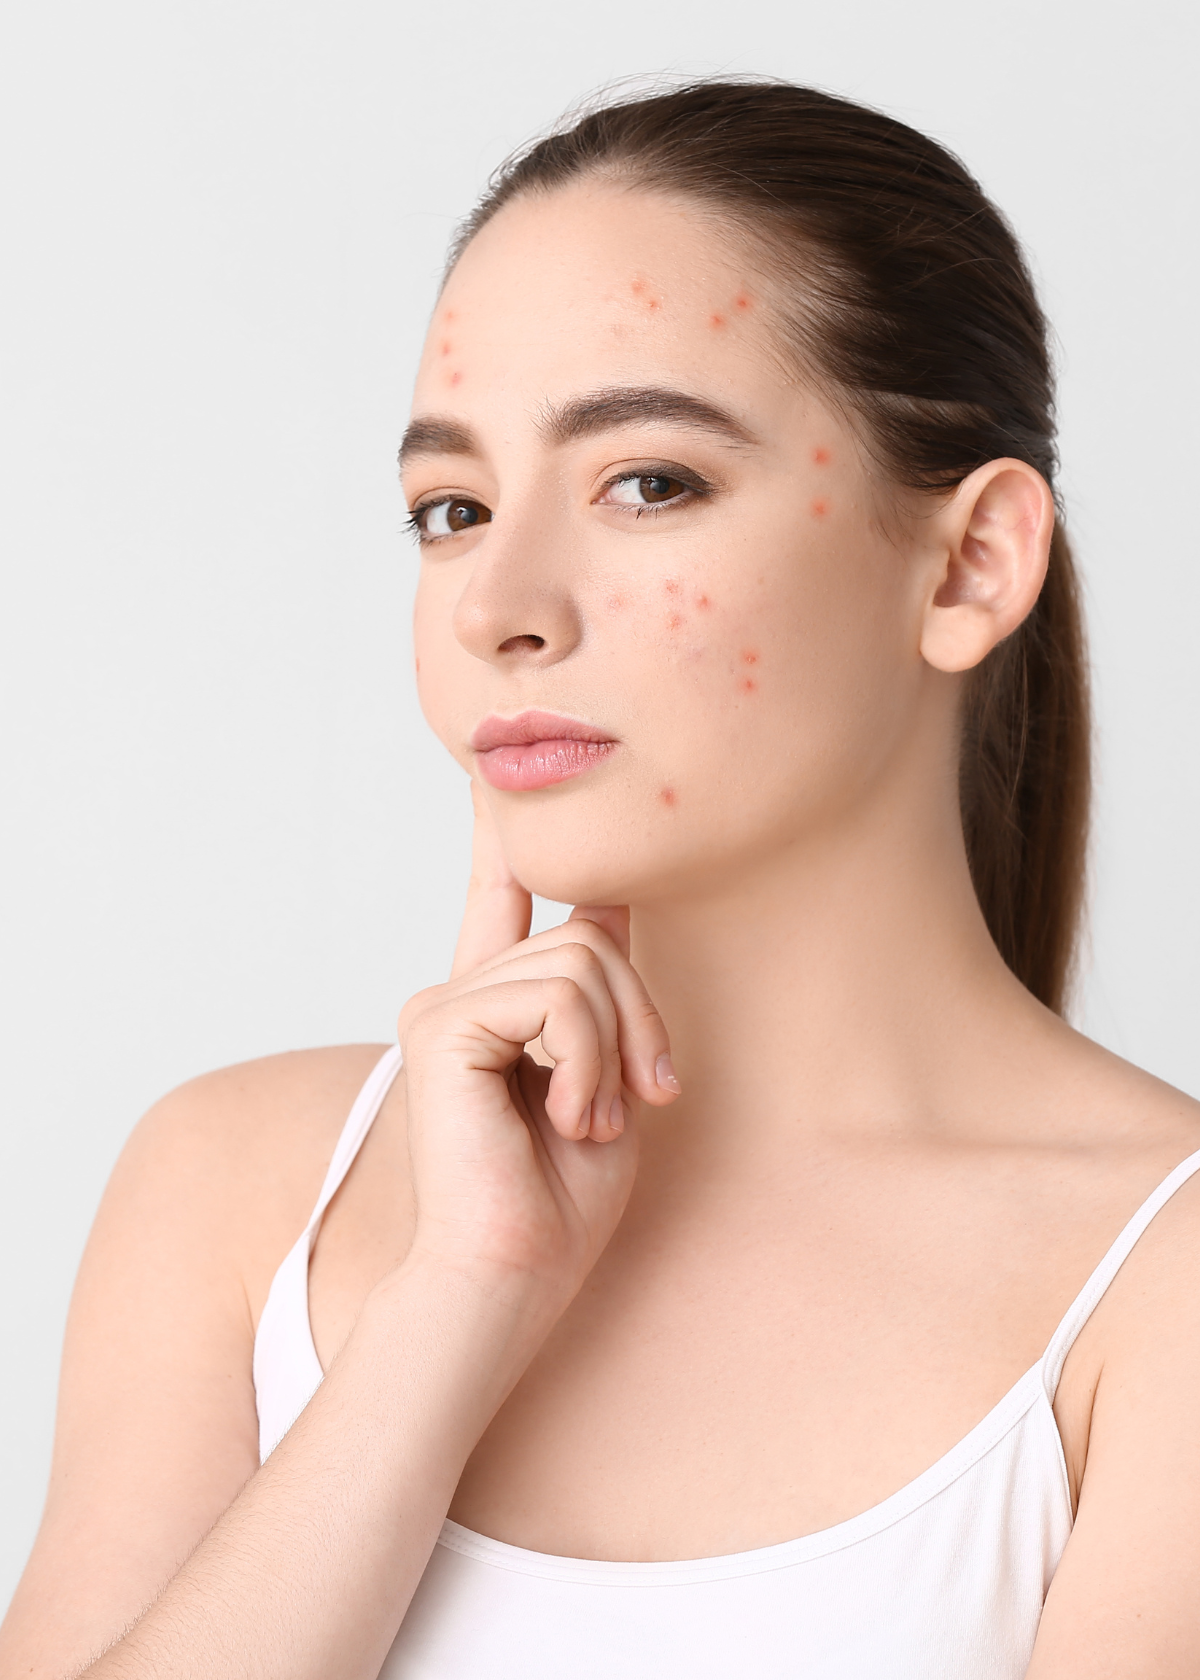 15 Best Moisturizers for Fungal Acne and Soothing Your Skin